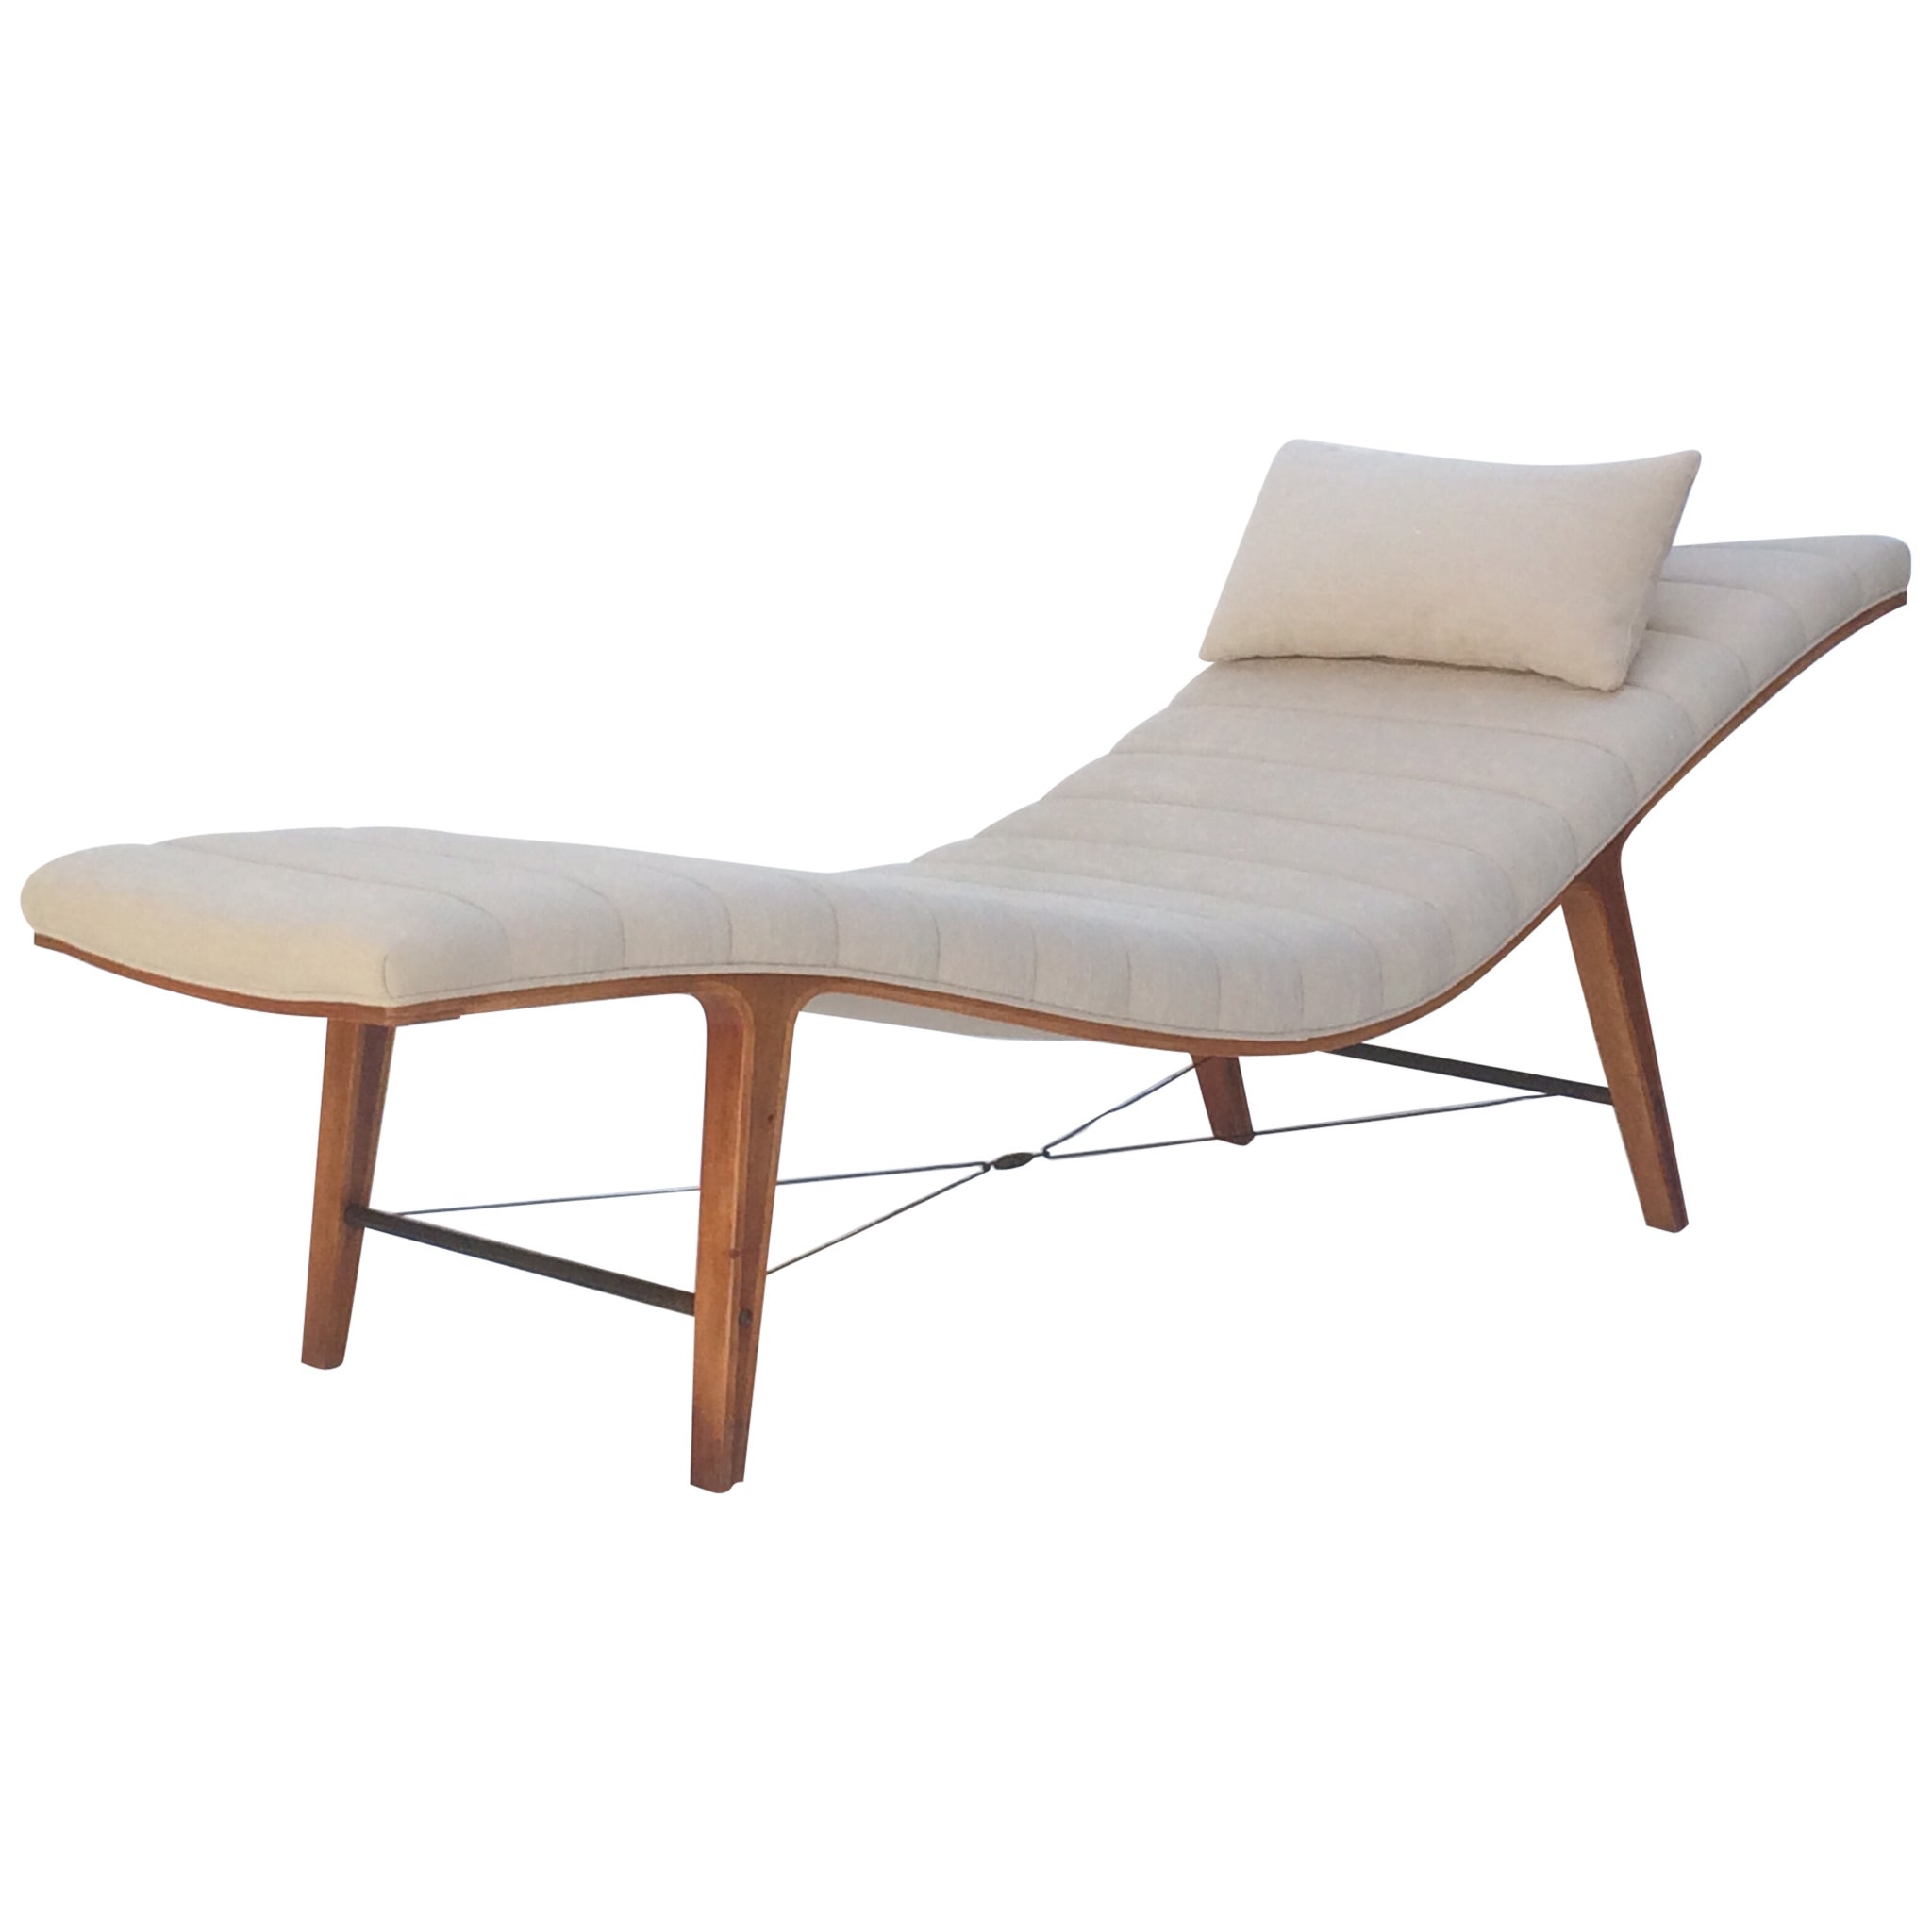 Listen To Me Chaise - For Sale on 1stDibs | listen to chaise longue, wet  leg chaise longue